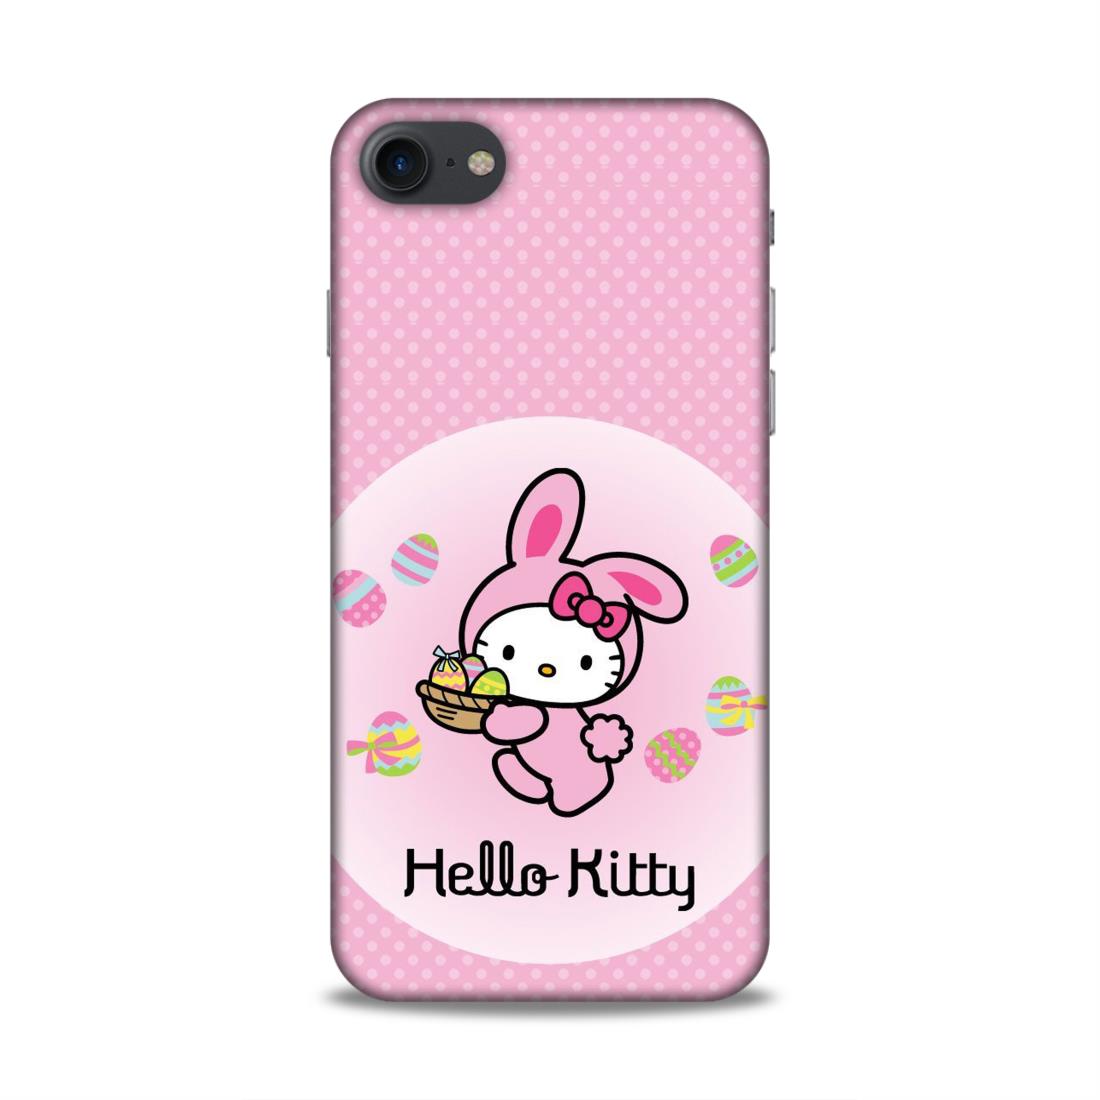 Hello Kitty Hard Back Case For Apple iPhone 7 / 8 / SE 2020